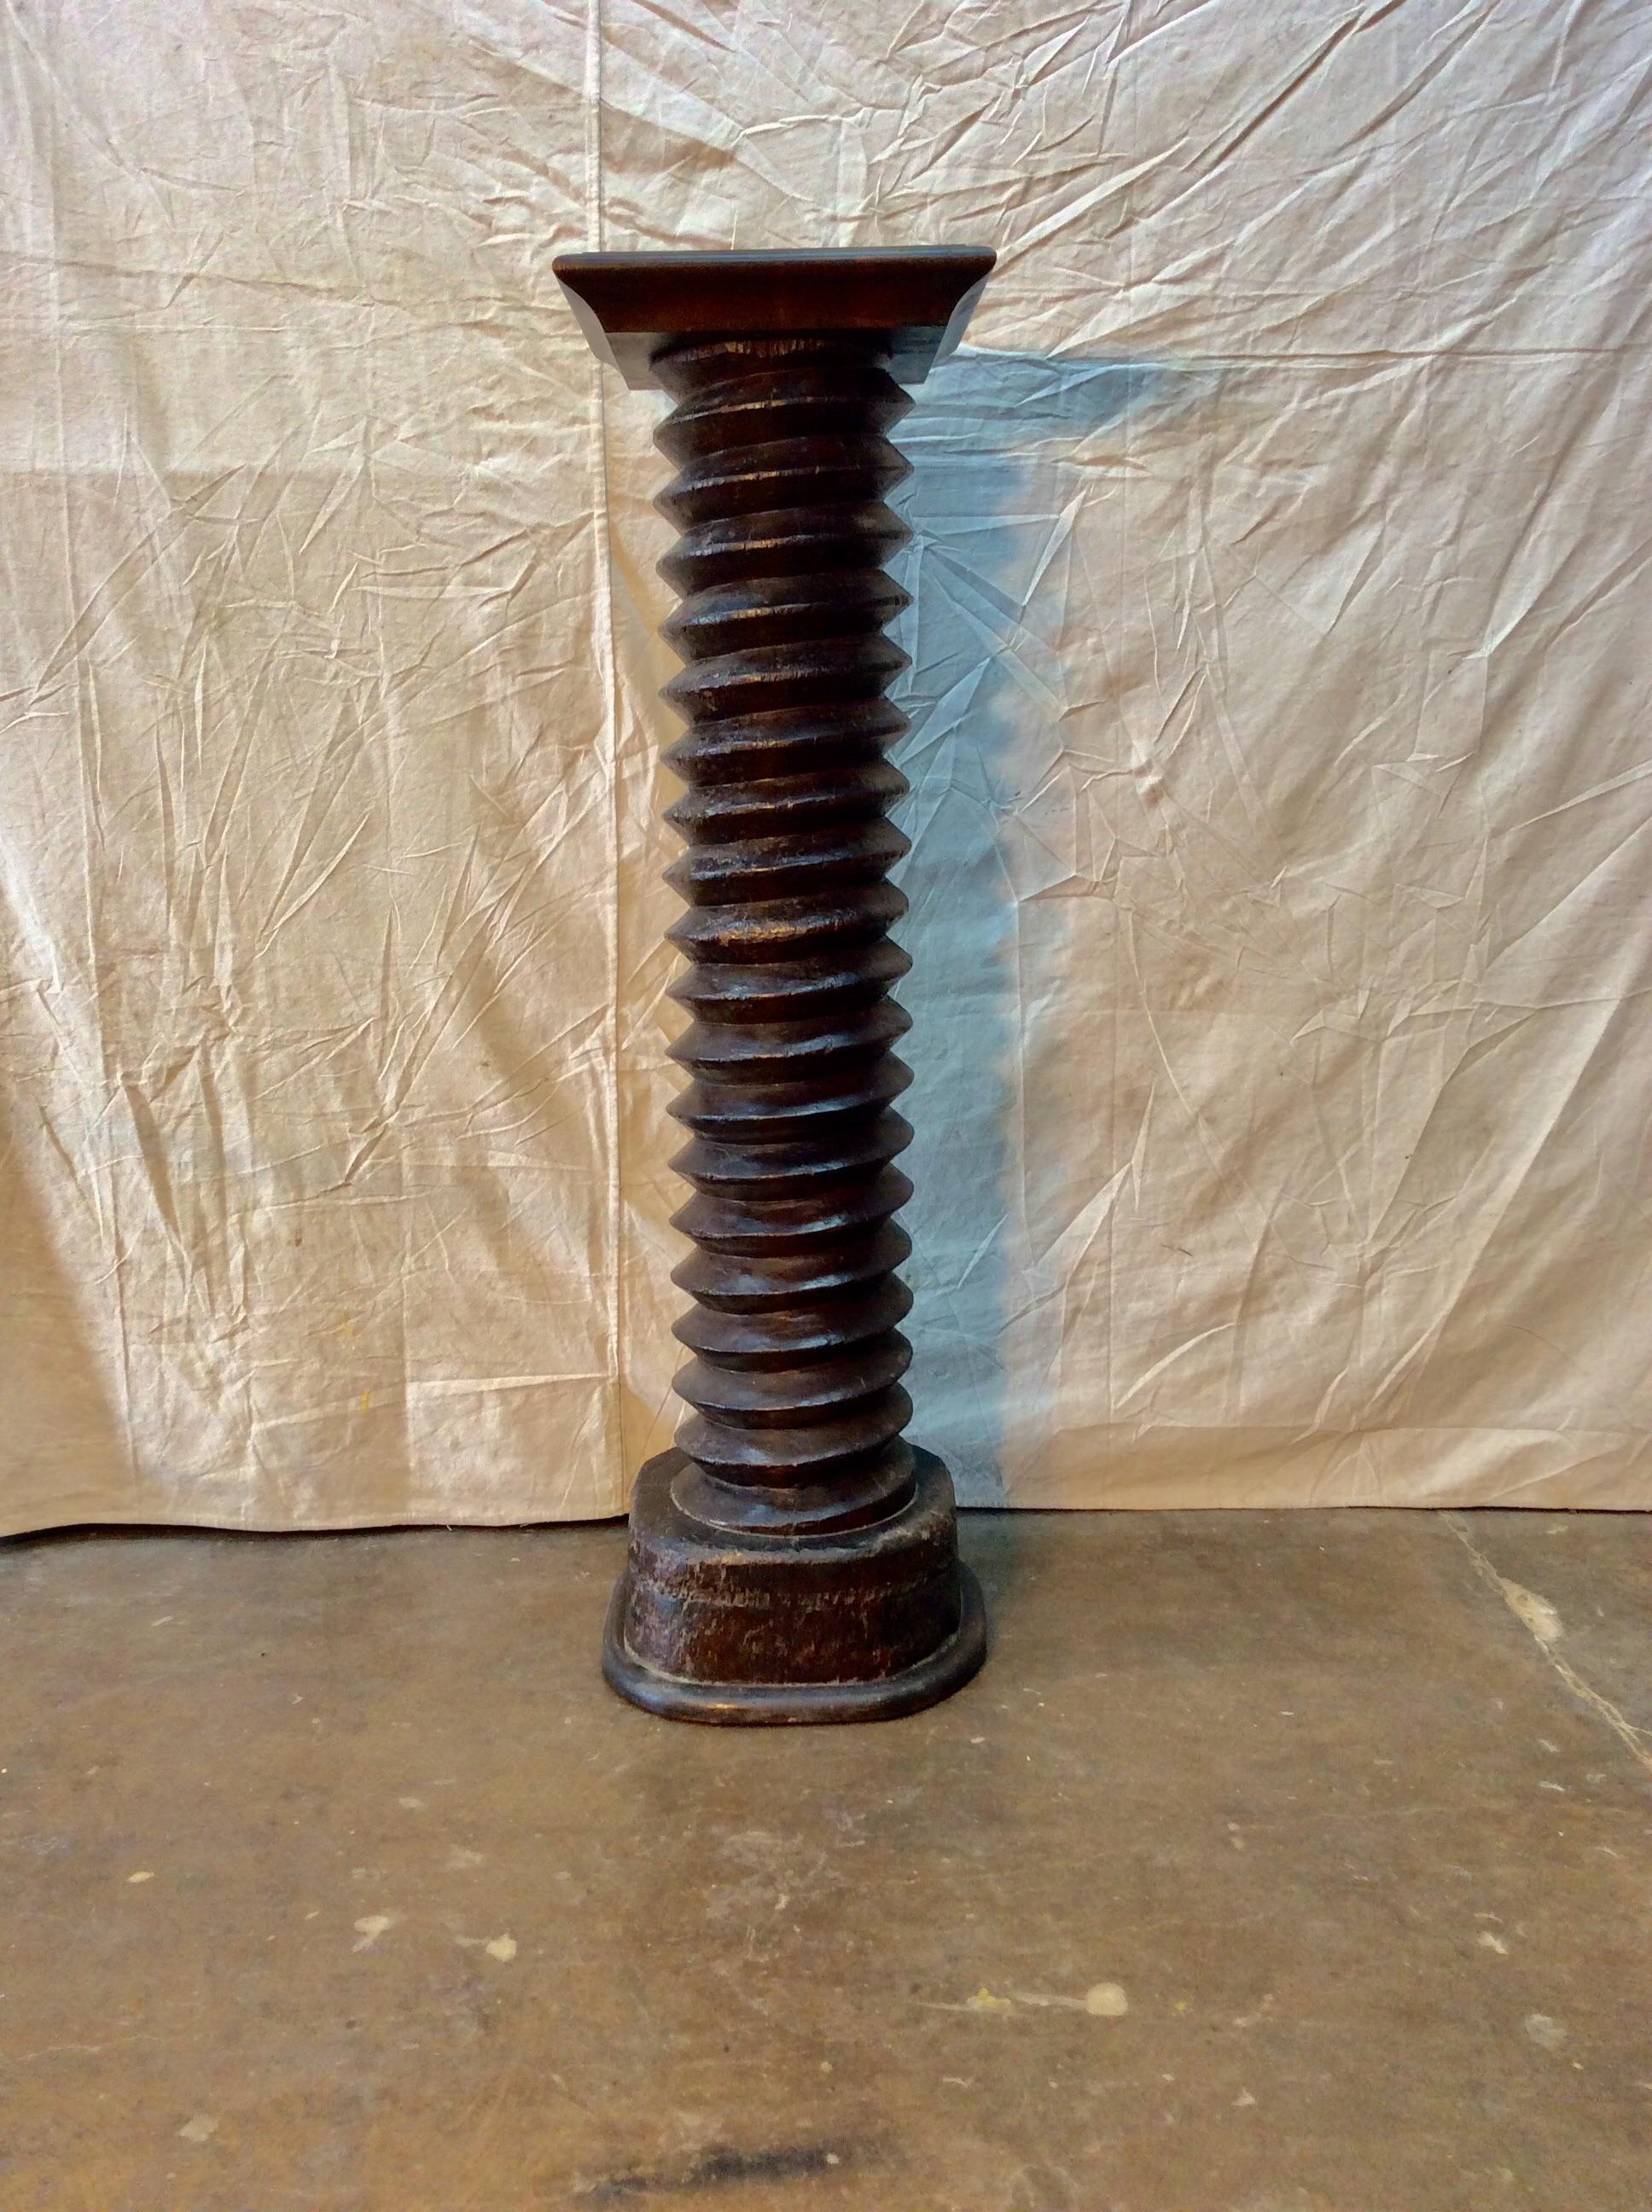 This wonderfully aged 19th century grape press screw was once used in a French winery. The shaft would have driven a large stone wheel downward, crushing and squeezing grapes, forcing out their juice as the stone rotated across them. The production